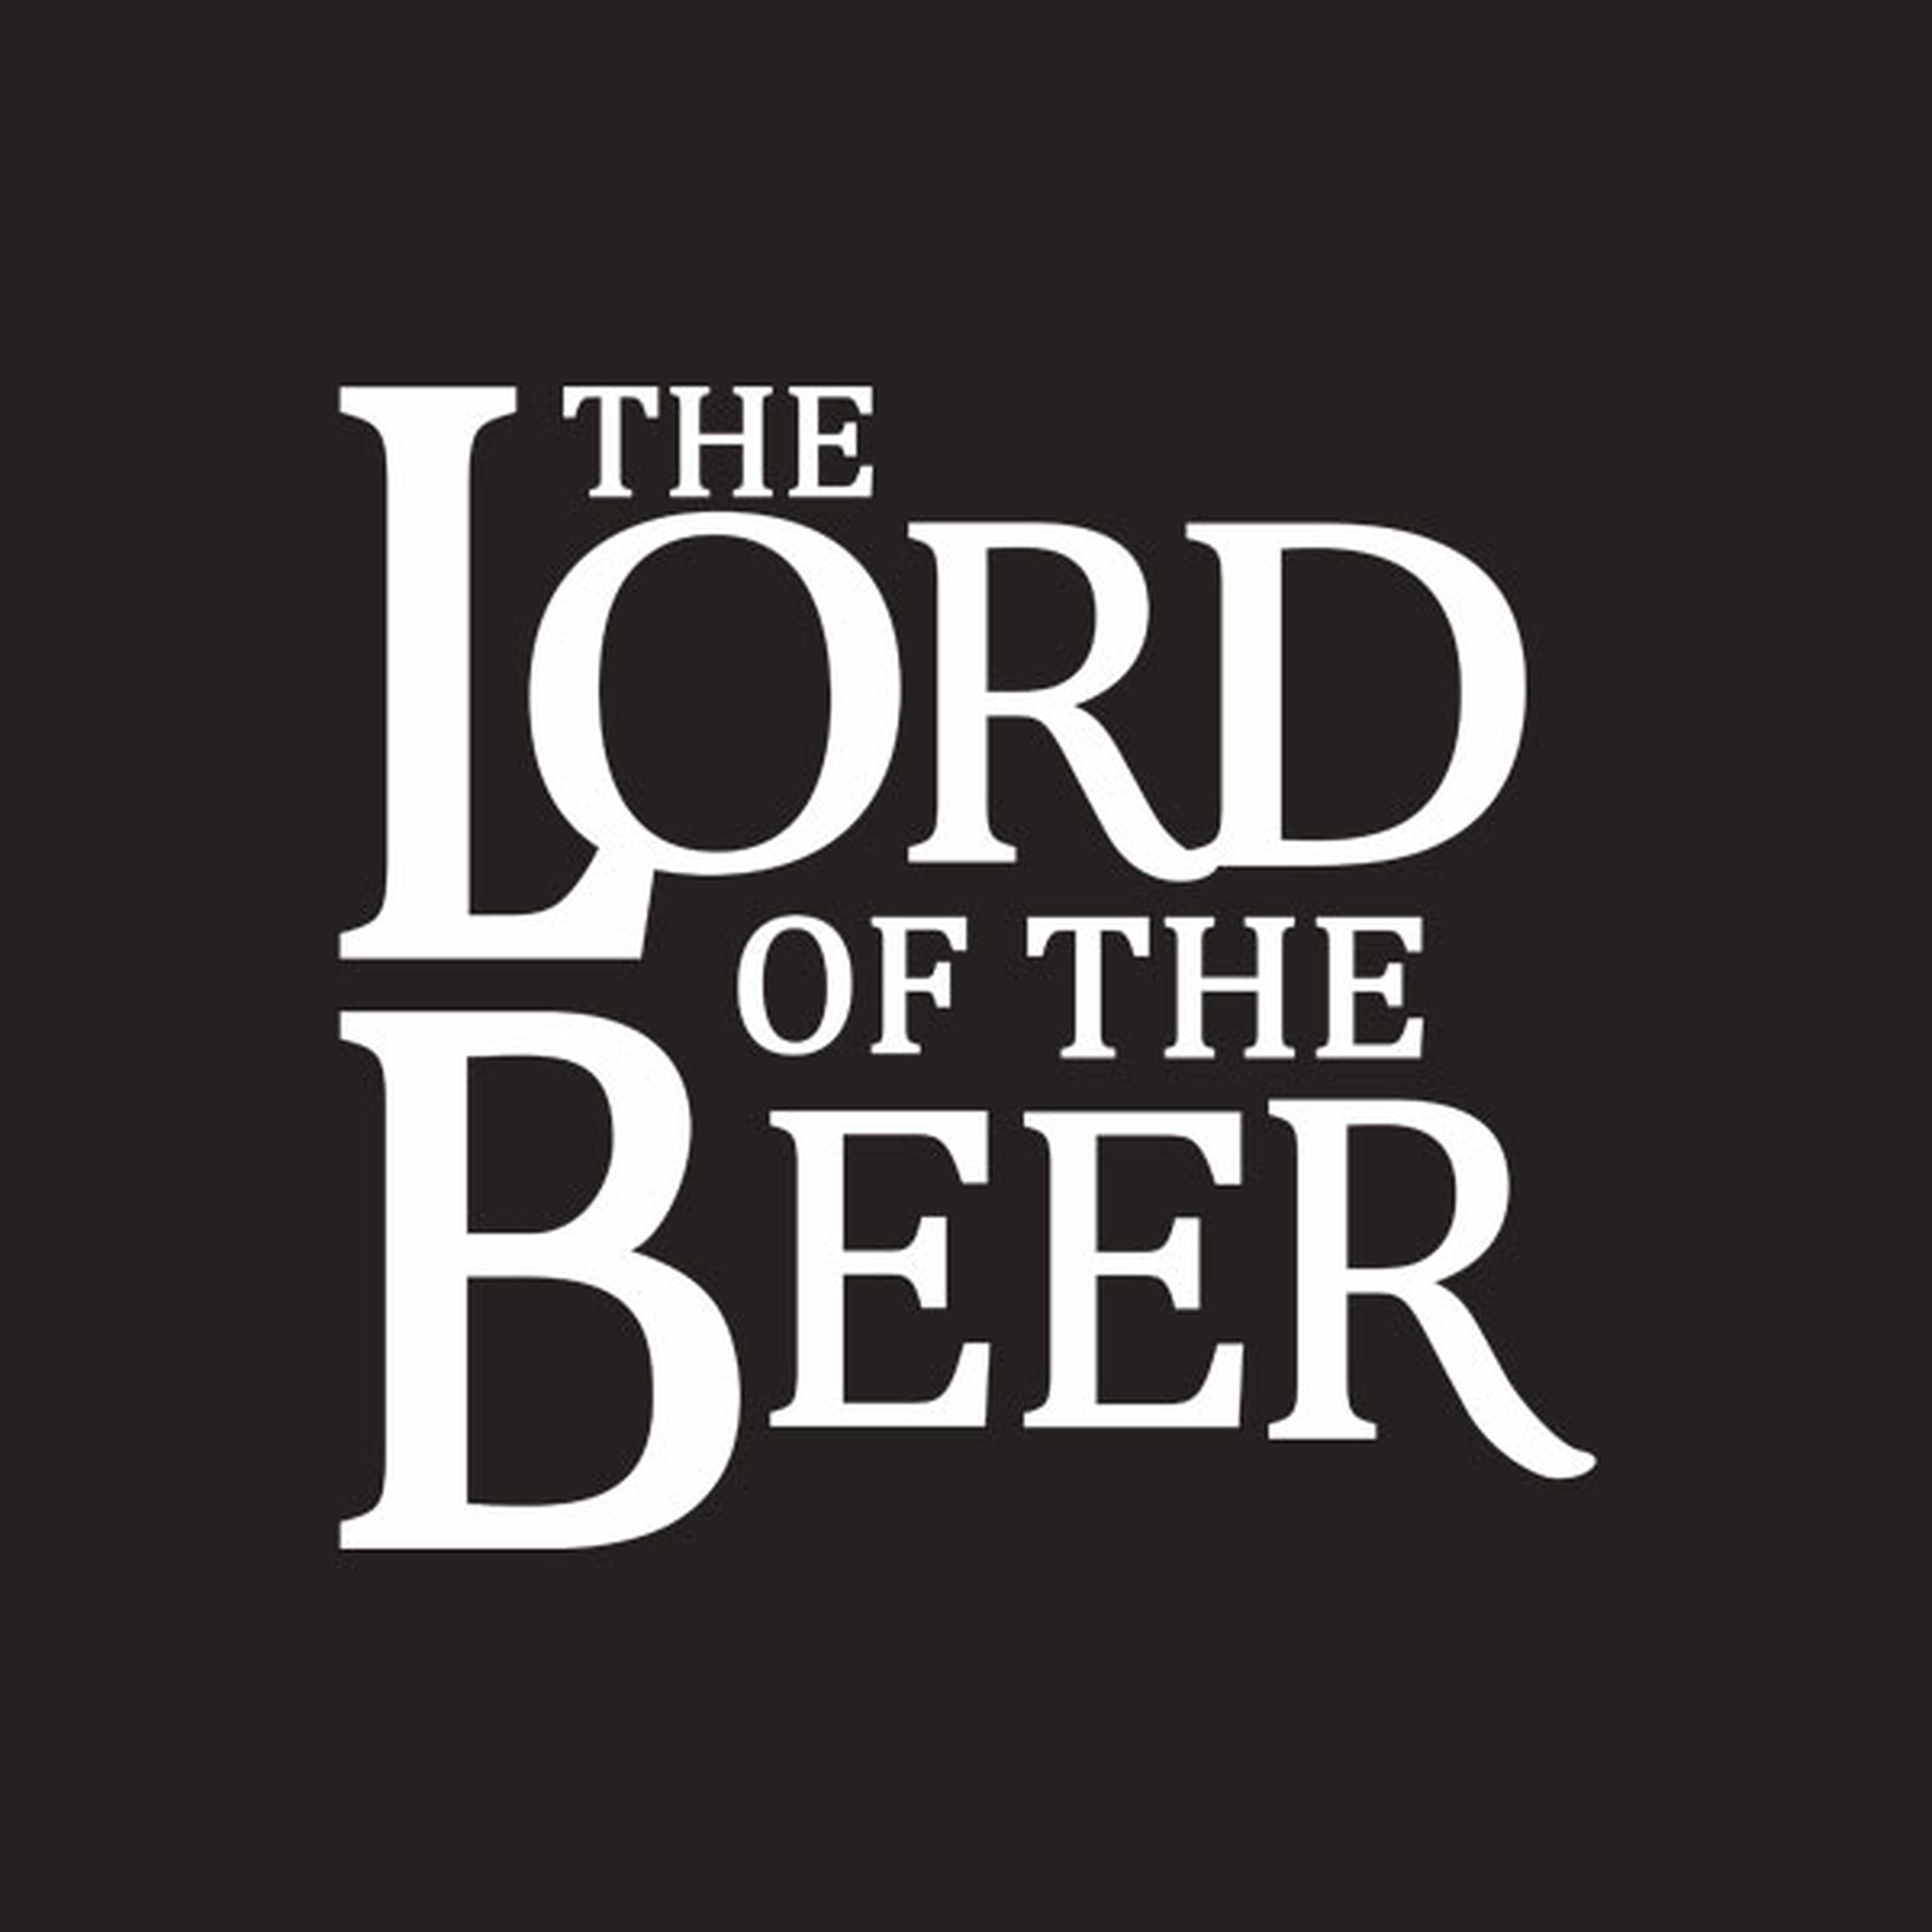 The Lord of the Beer - T-shirt